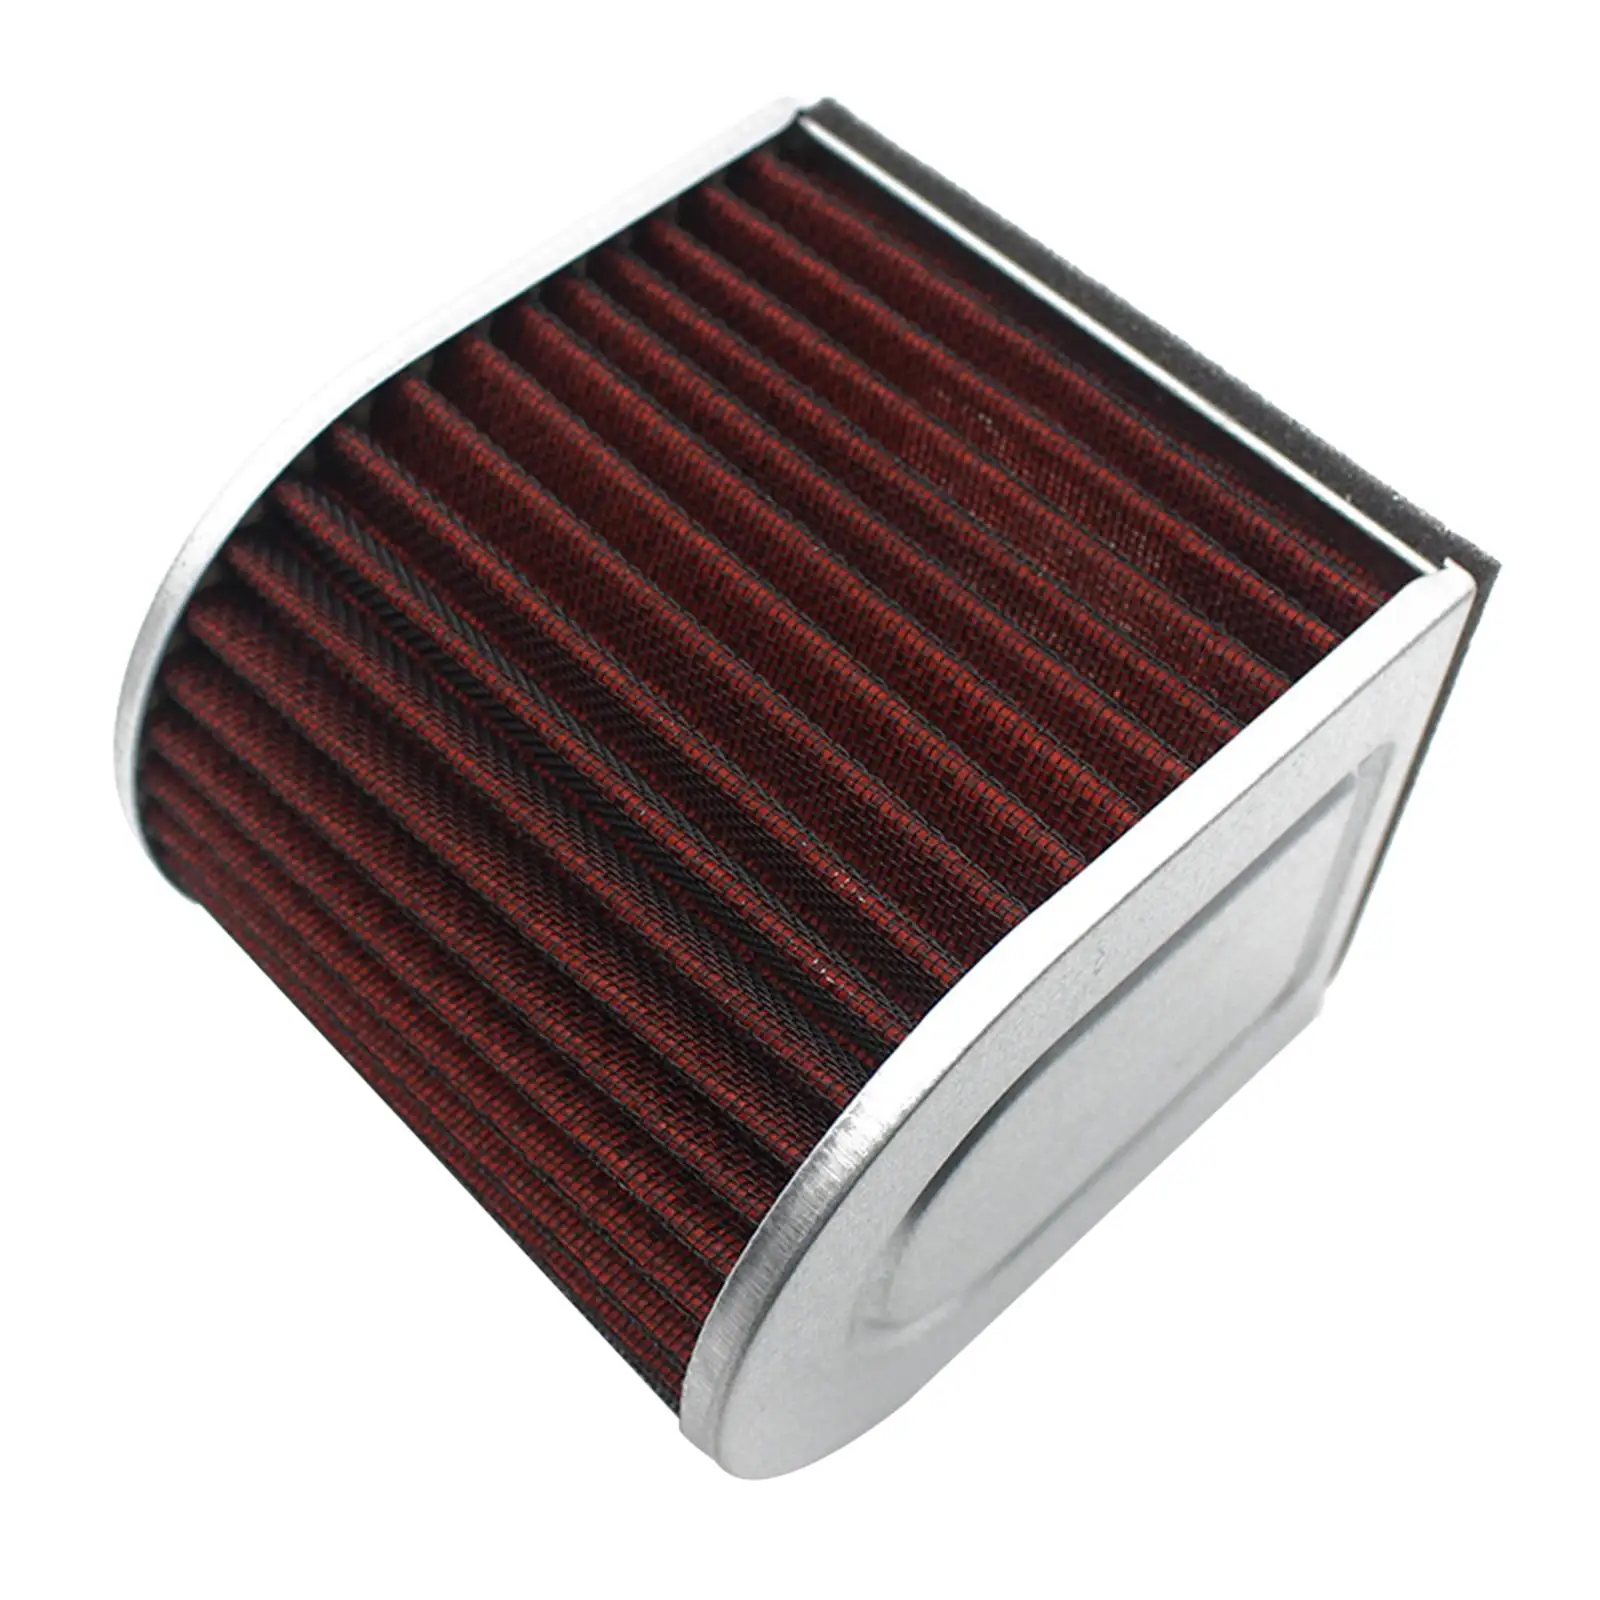 Motorcycle Air Filter 17211-Mkp-J00 Accessories Fit for Honda CB500x CB400x